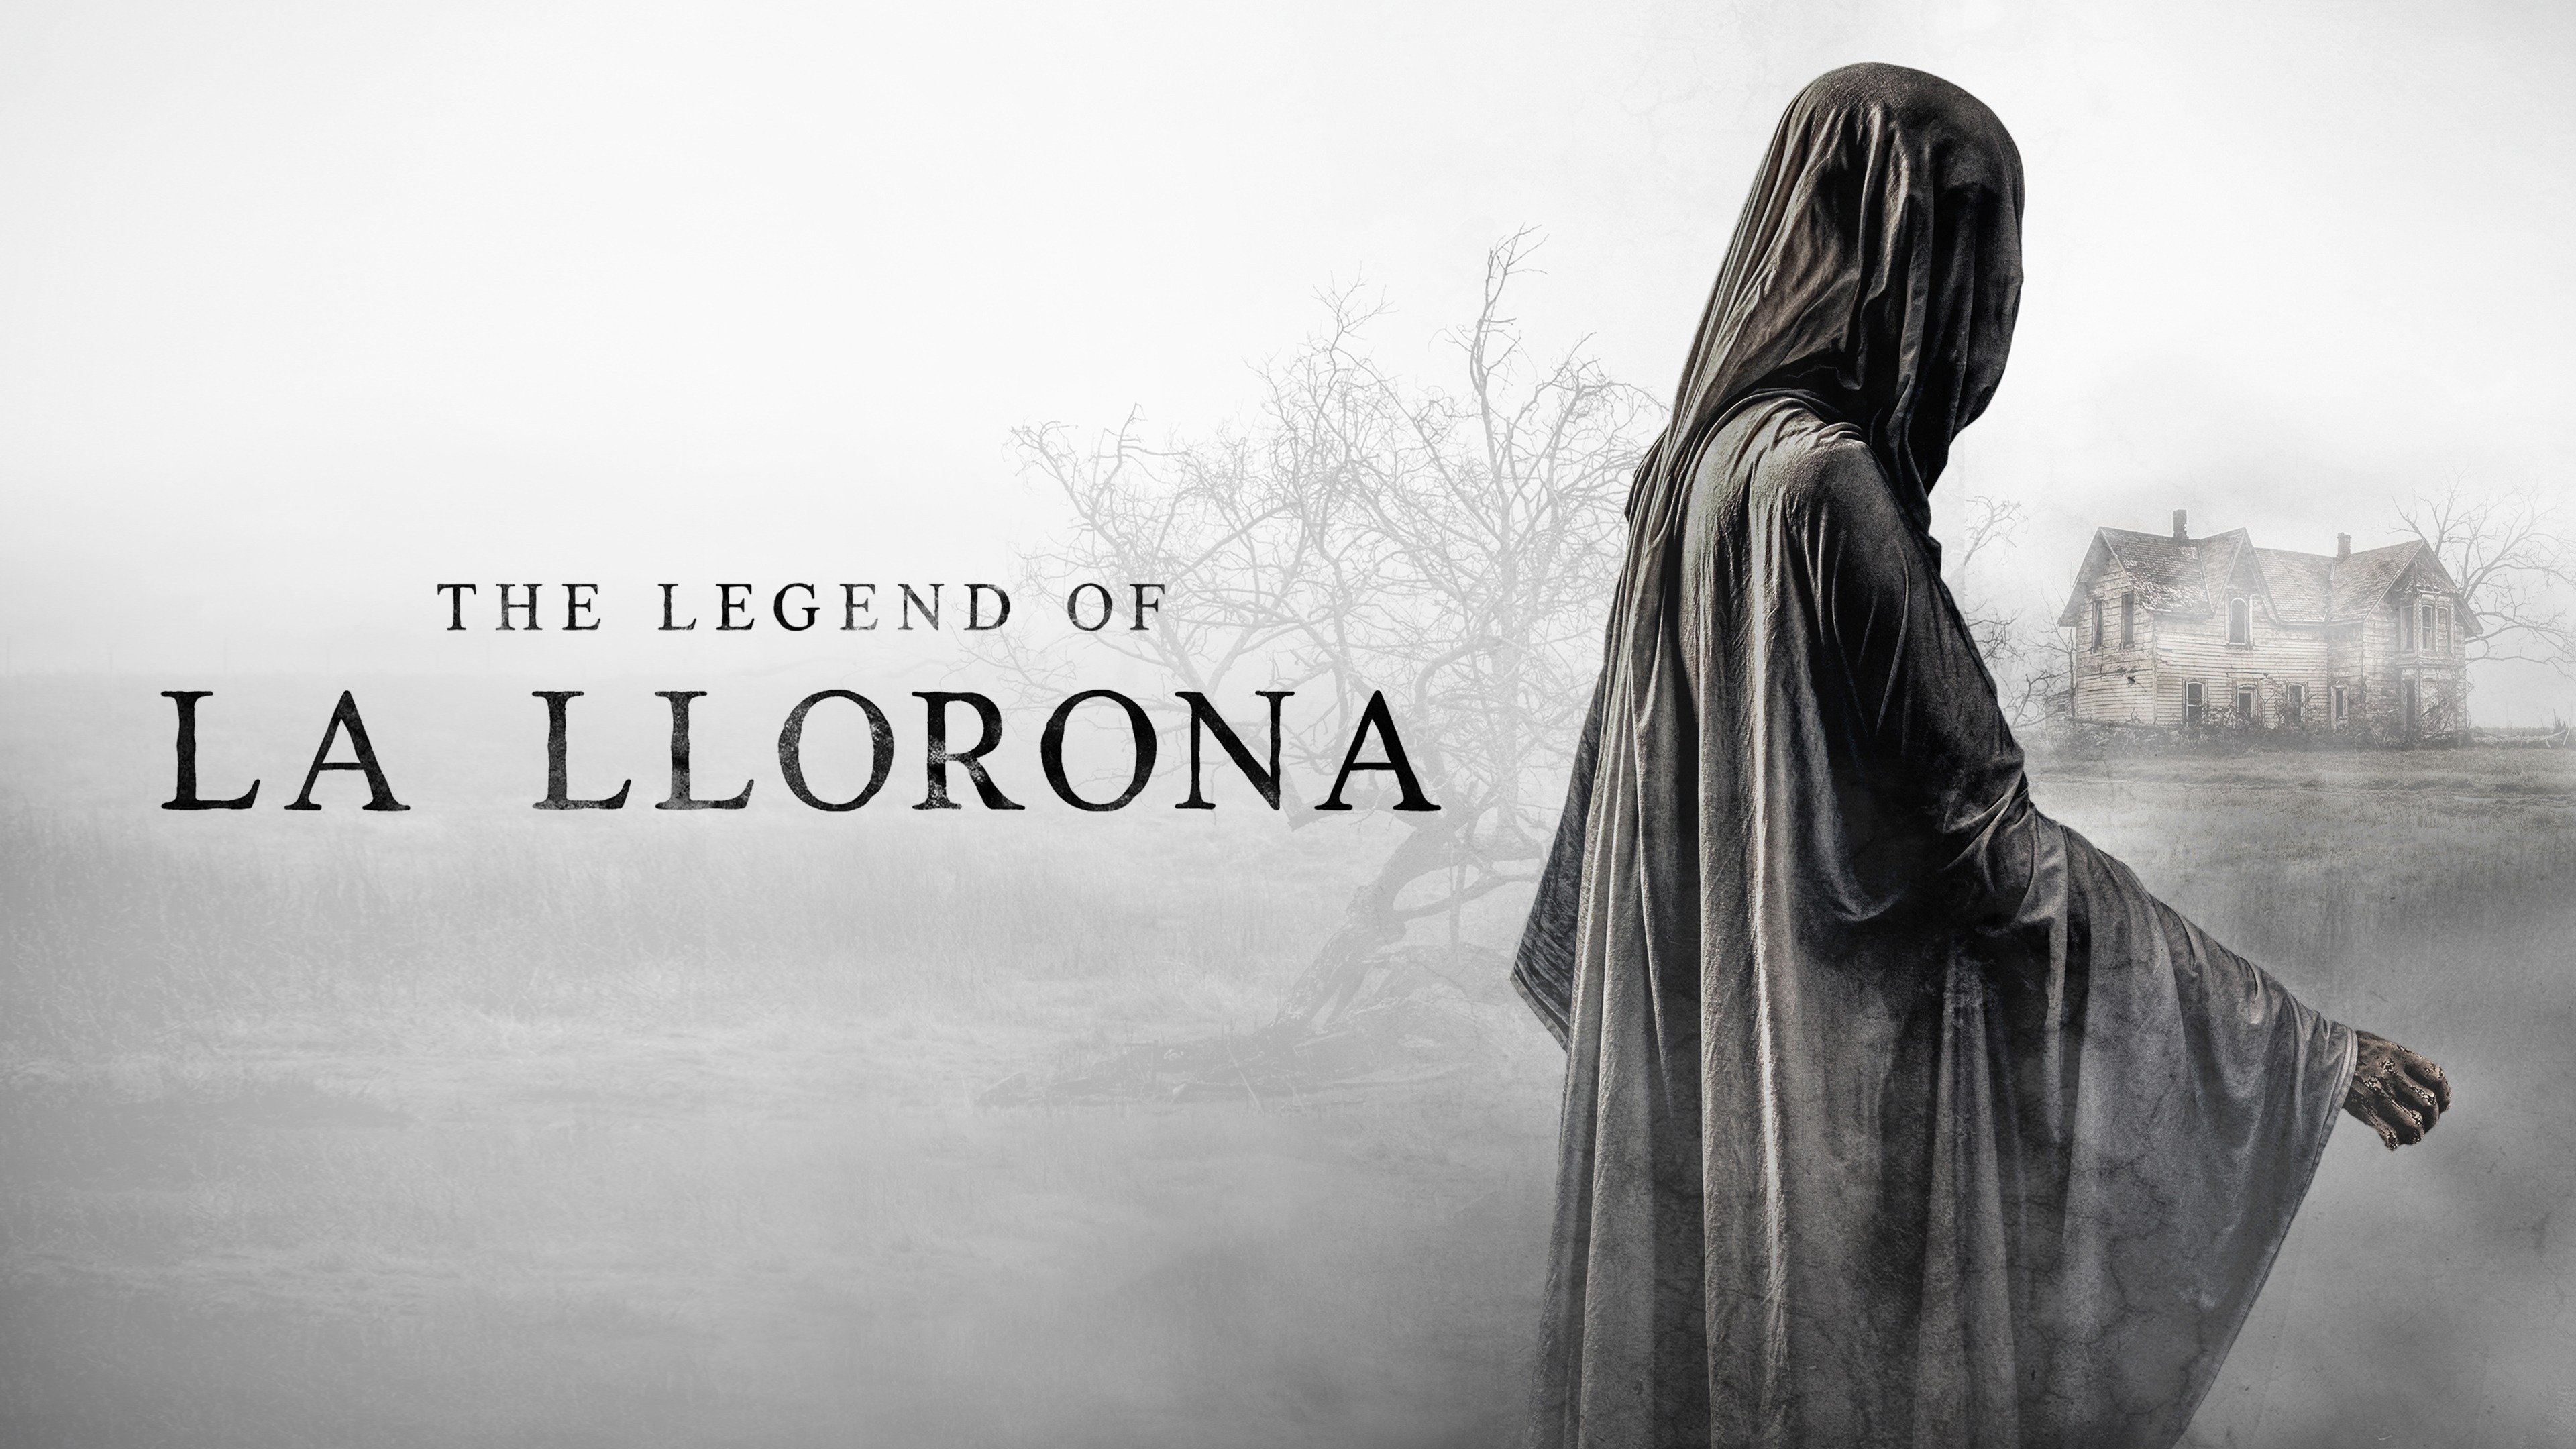 Blue Hair and Mexican Folklore: The Legend of La Llorona - wide 9